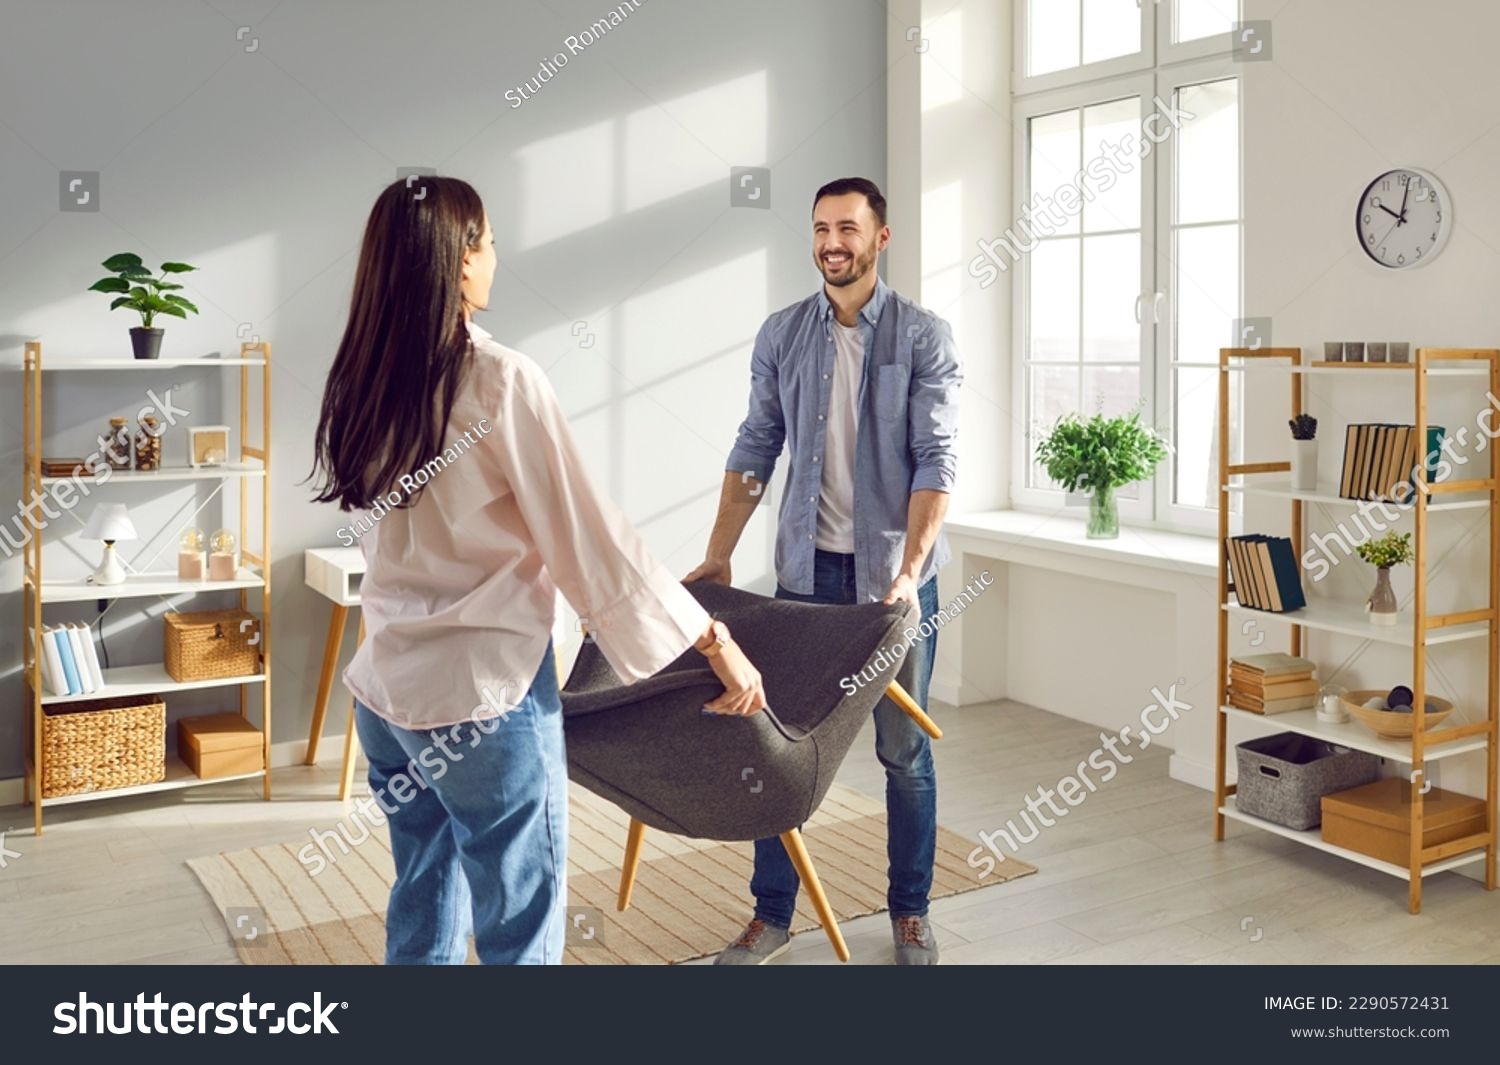 Young couple carrying armchair into their living room. Smiling man and woman moving into new apartment, furnishing and remodeling room. House improvement, remodeling concept #2290572431